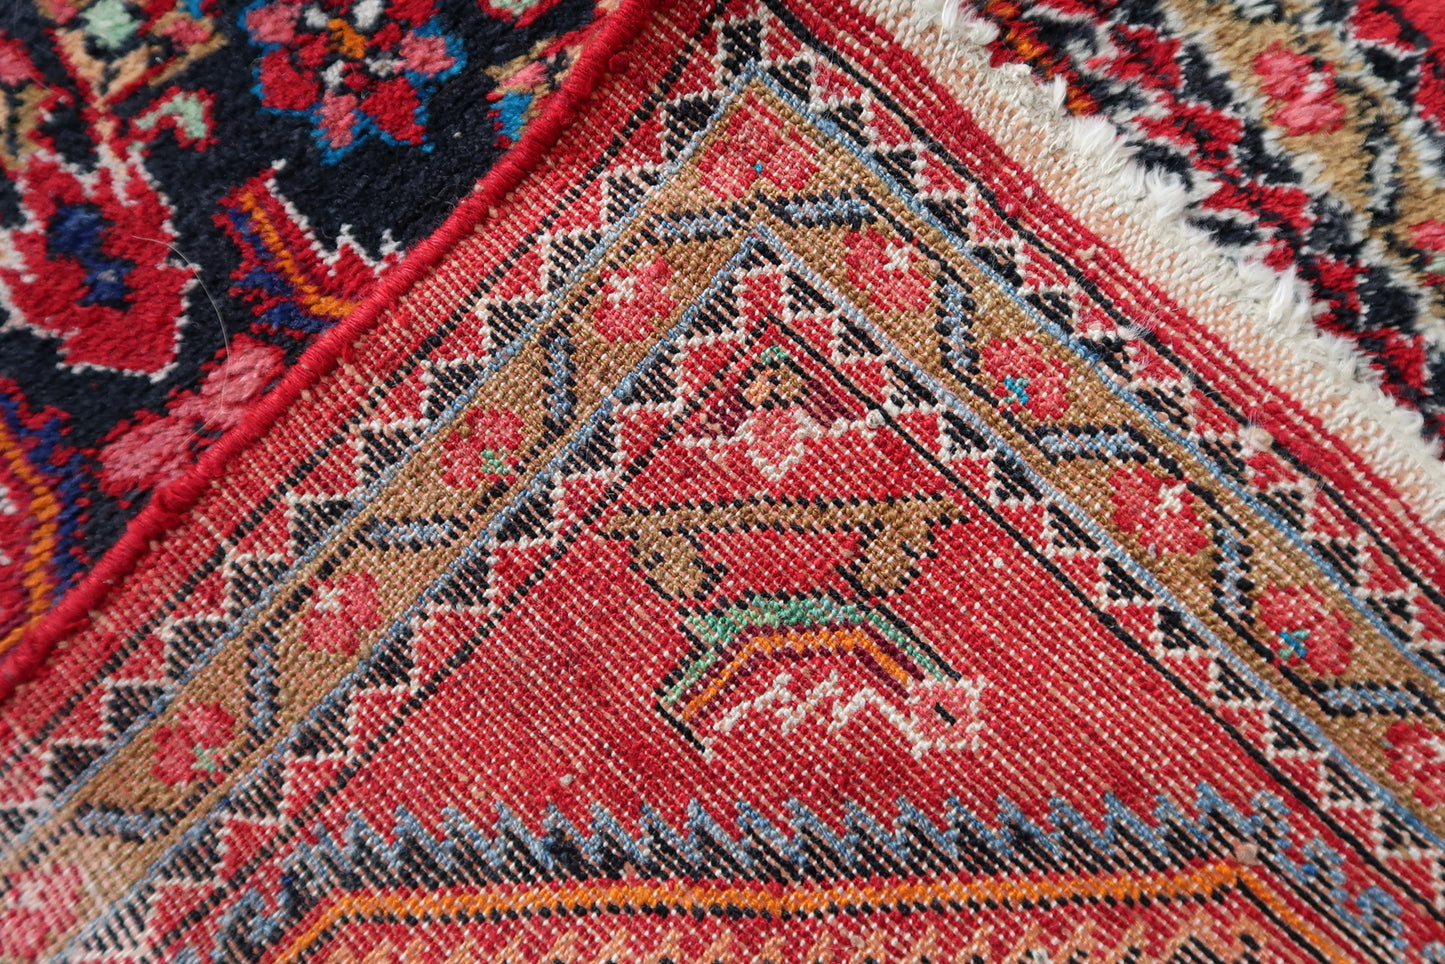 Back side of the Handmade Vintage Persian Hamadan Rug - Underside view revealing the rug's construction and material.